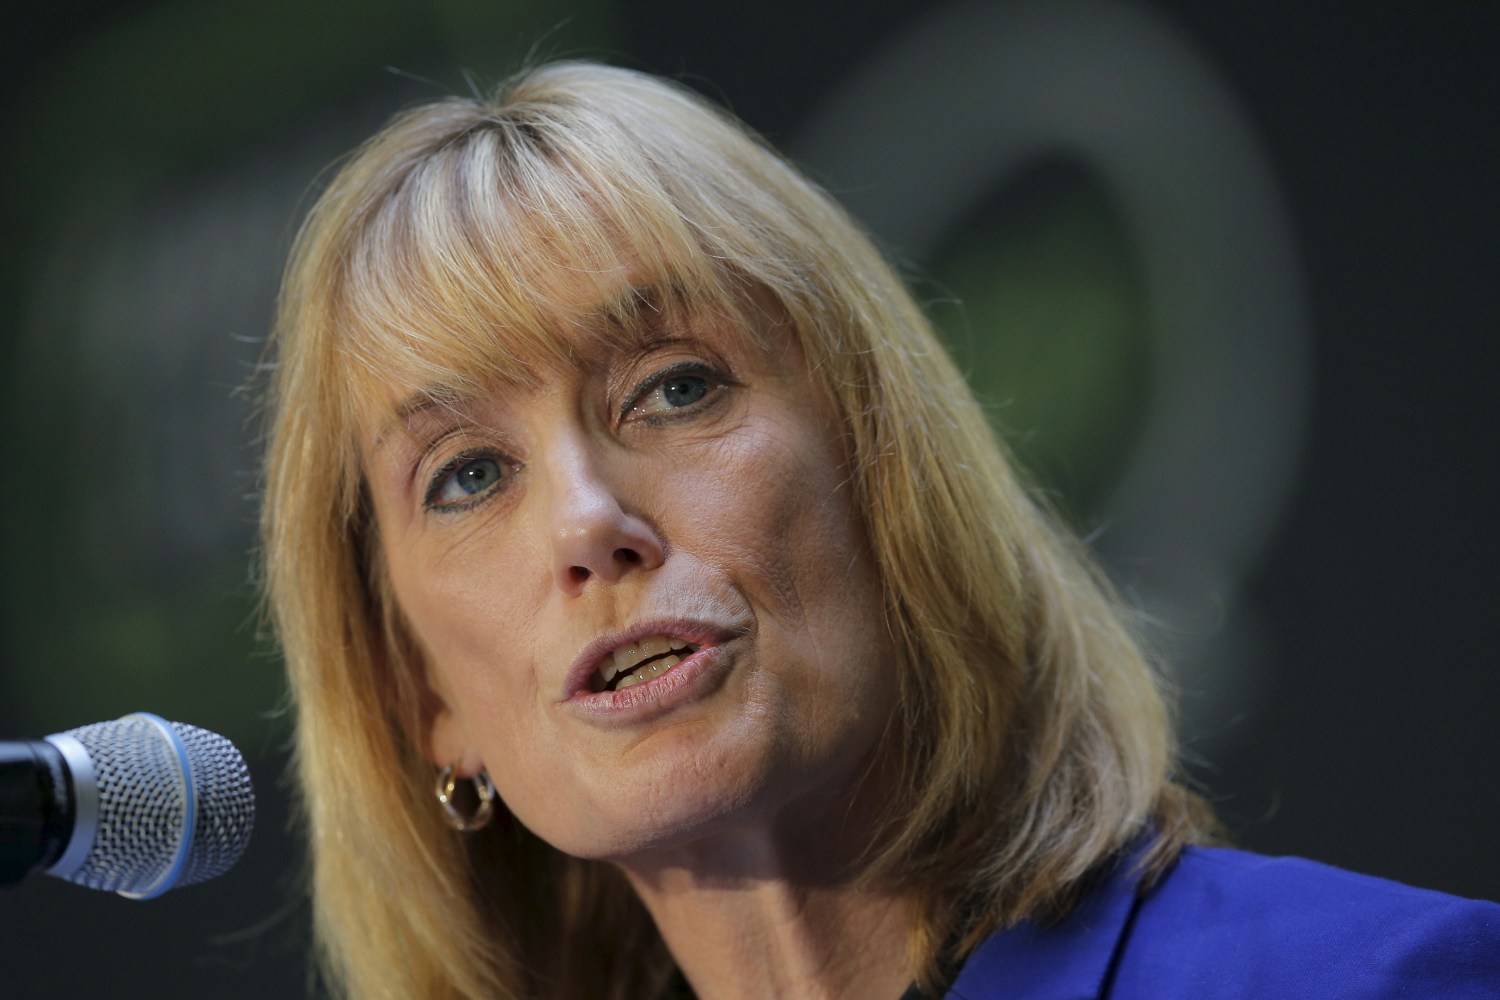 New Hampshire Governor Maggie Hassan speaks at the No Labels Problem Solver Convention in Manchester, New Hampshire October 12, 2015. REUTERS/Brian Snyder - RTS43ZV